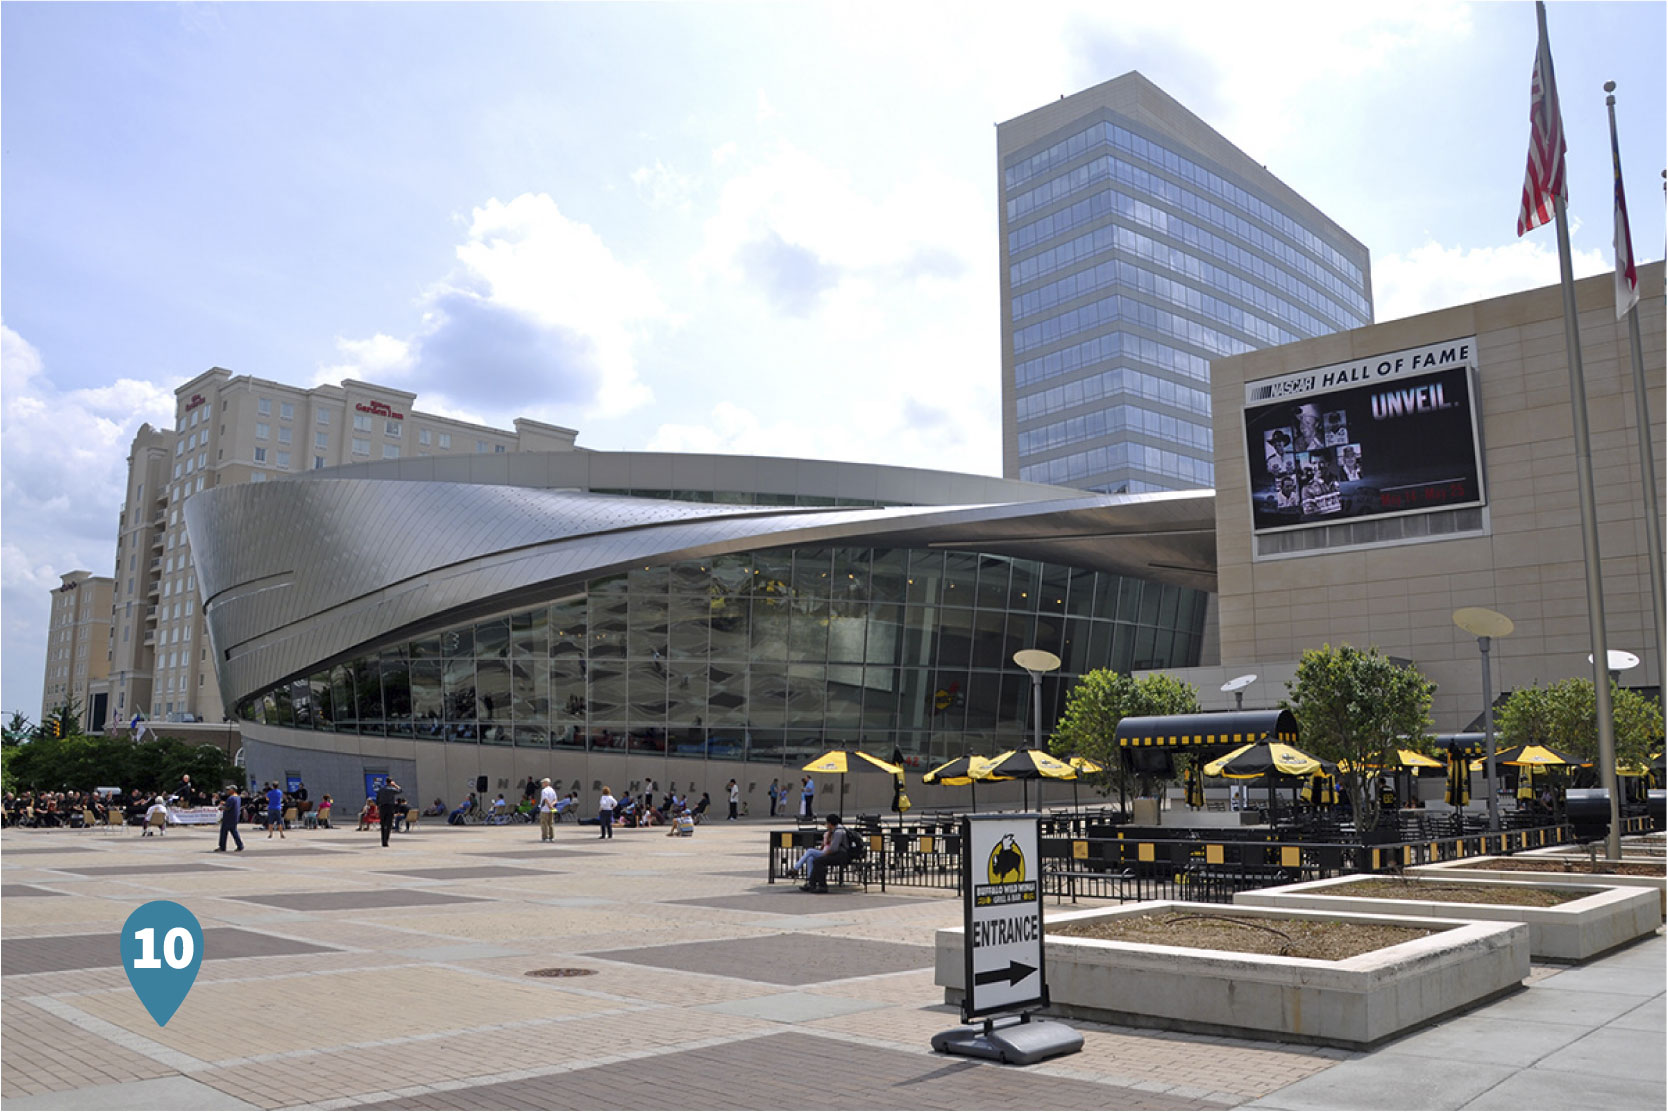 Exterior view of the NASCAR Hall of Fame in Charlotte, North Carolina